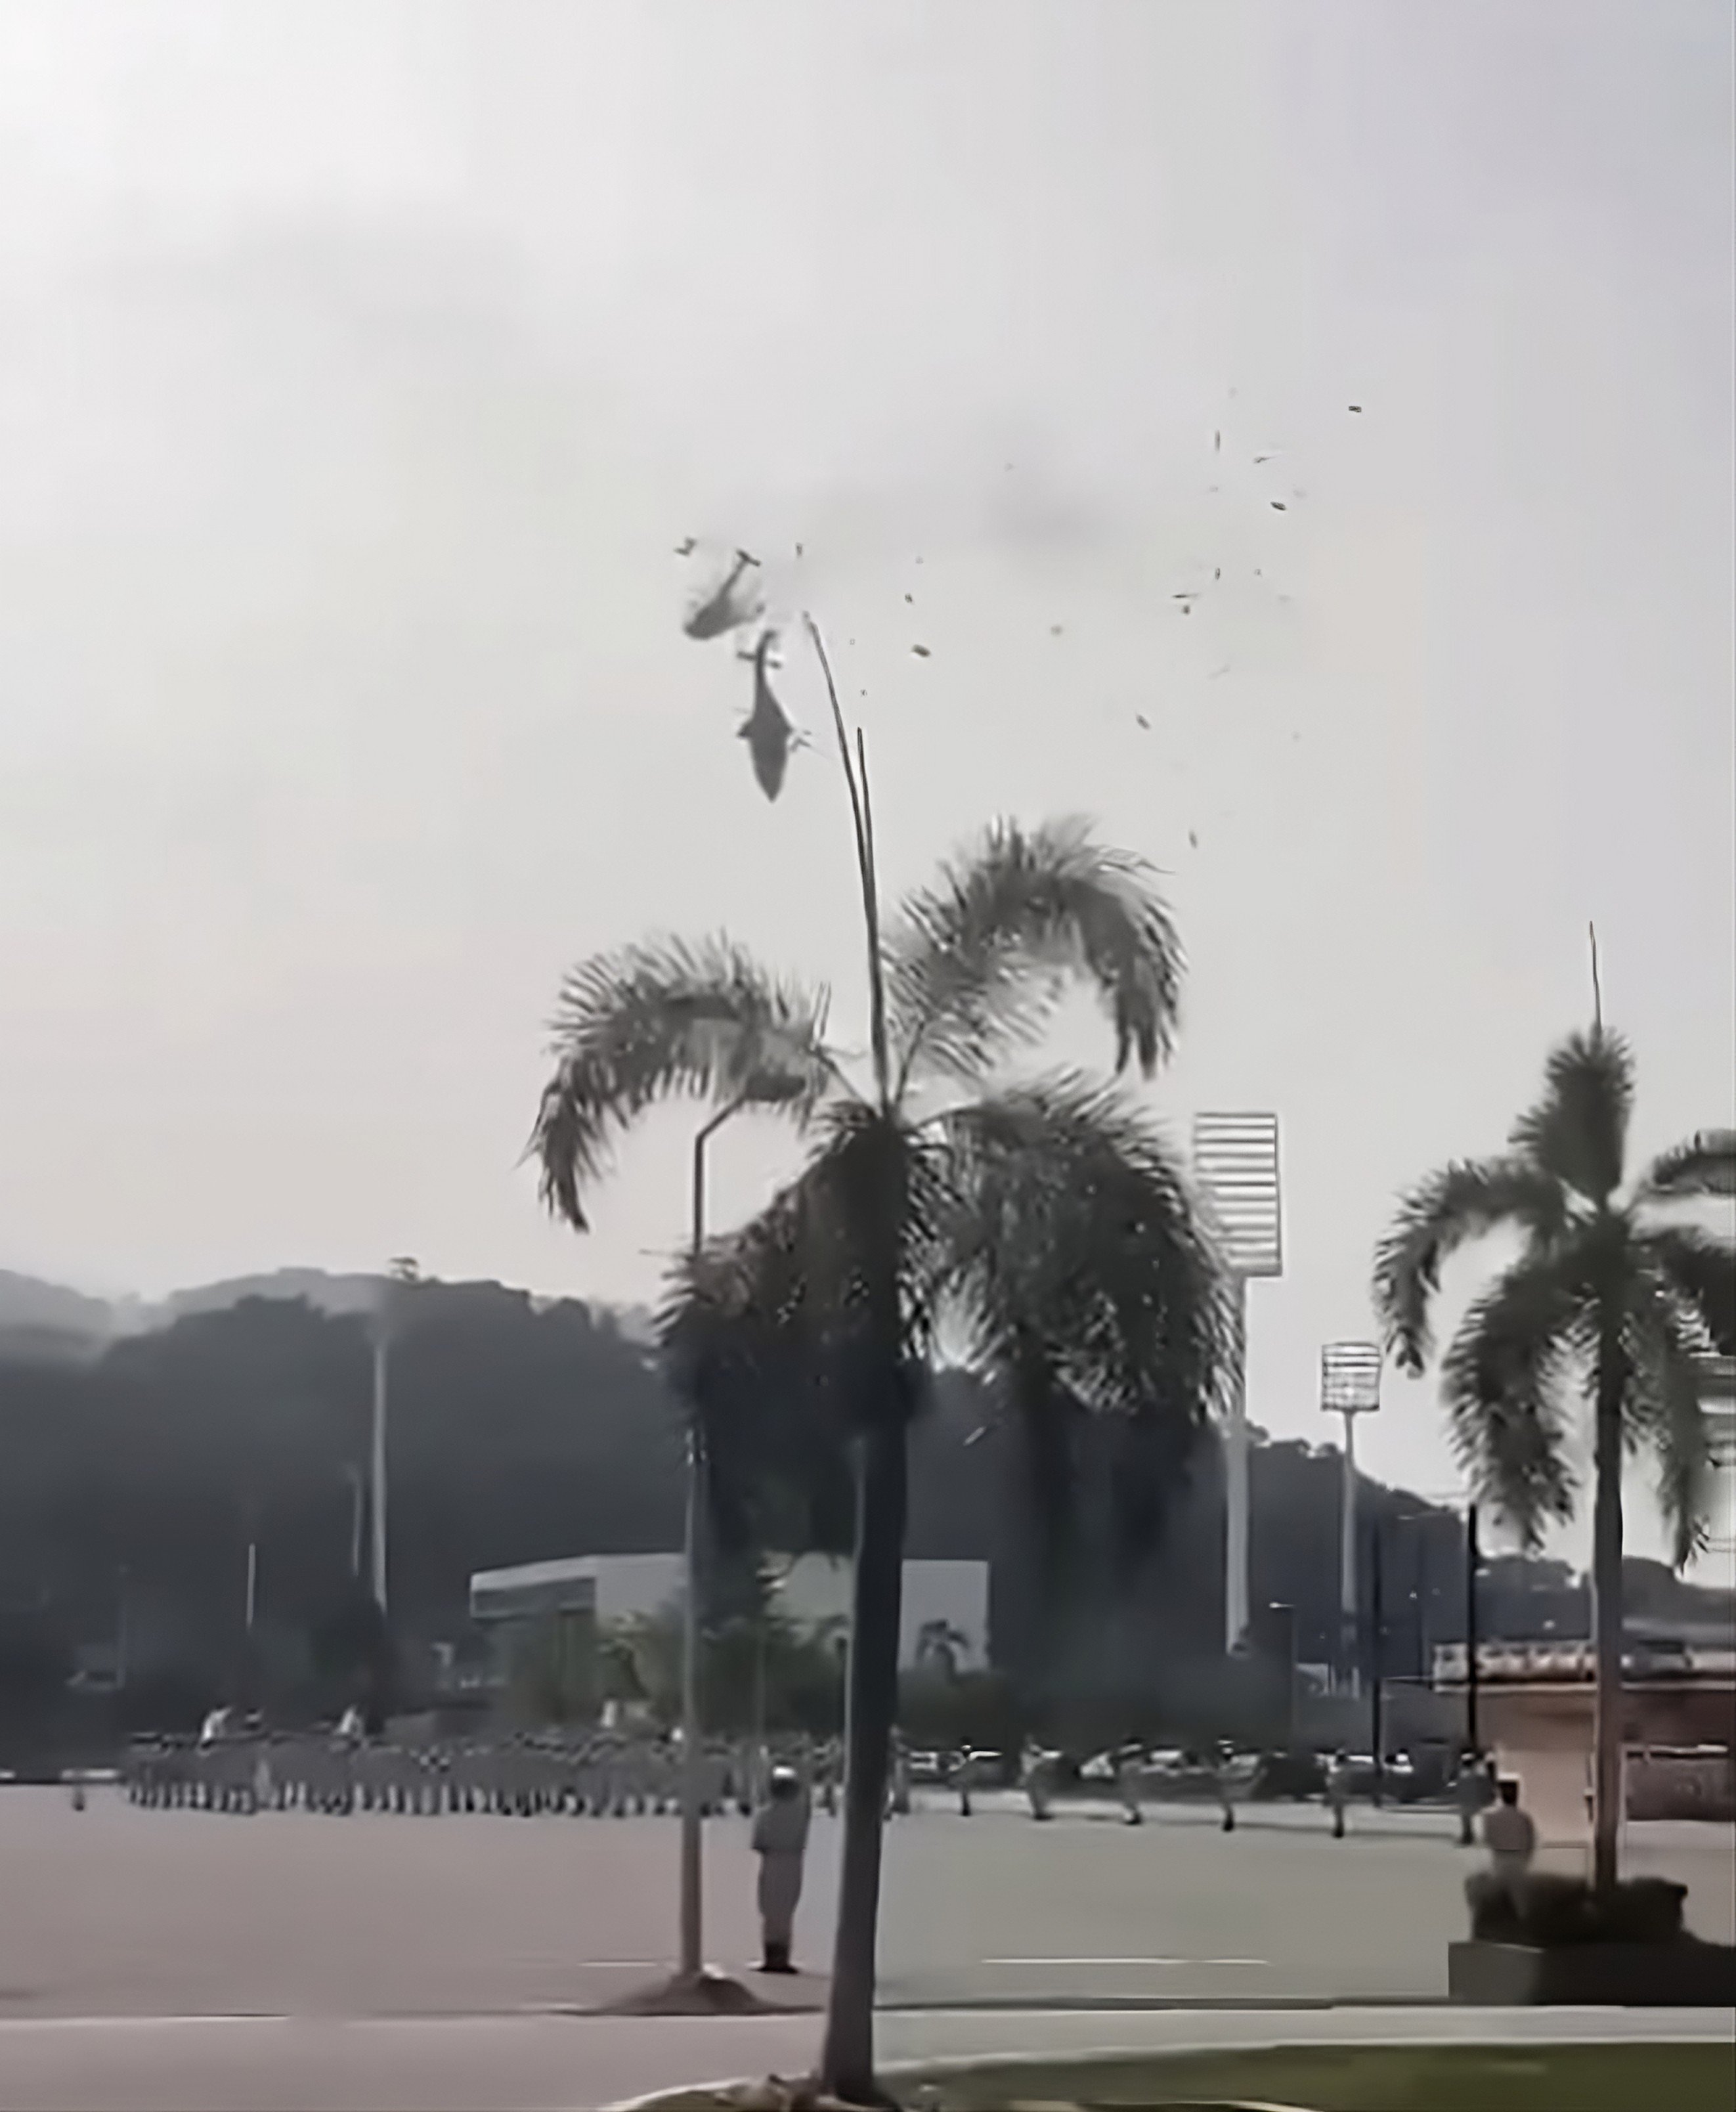 A still from a social media video shows the moment after the two naval helicopters crashed in Perak on Tuesday morning. Photo: Instagram/majoritioffical